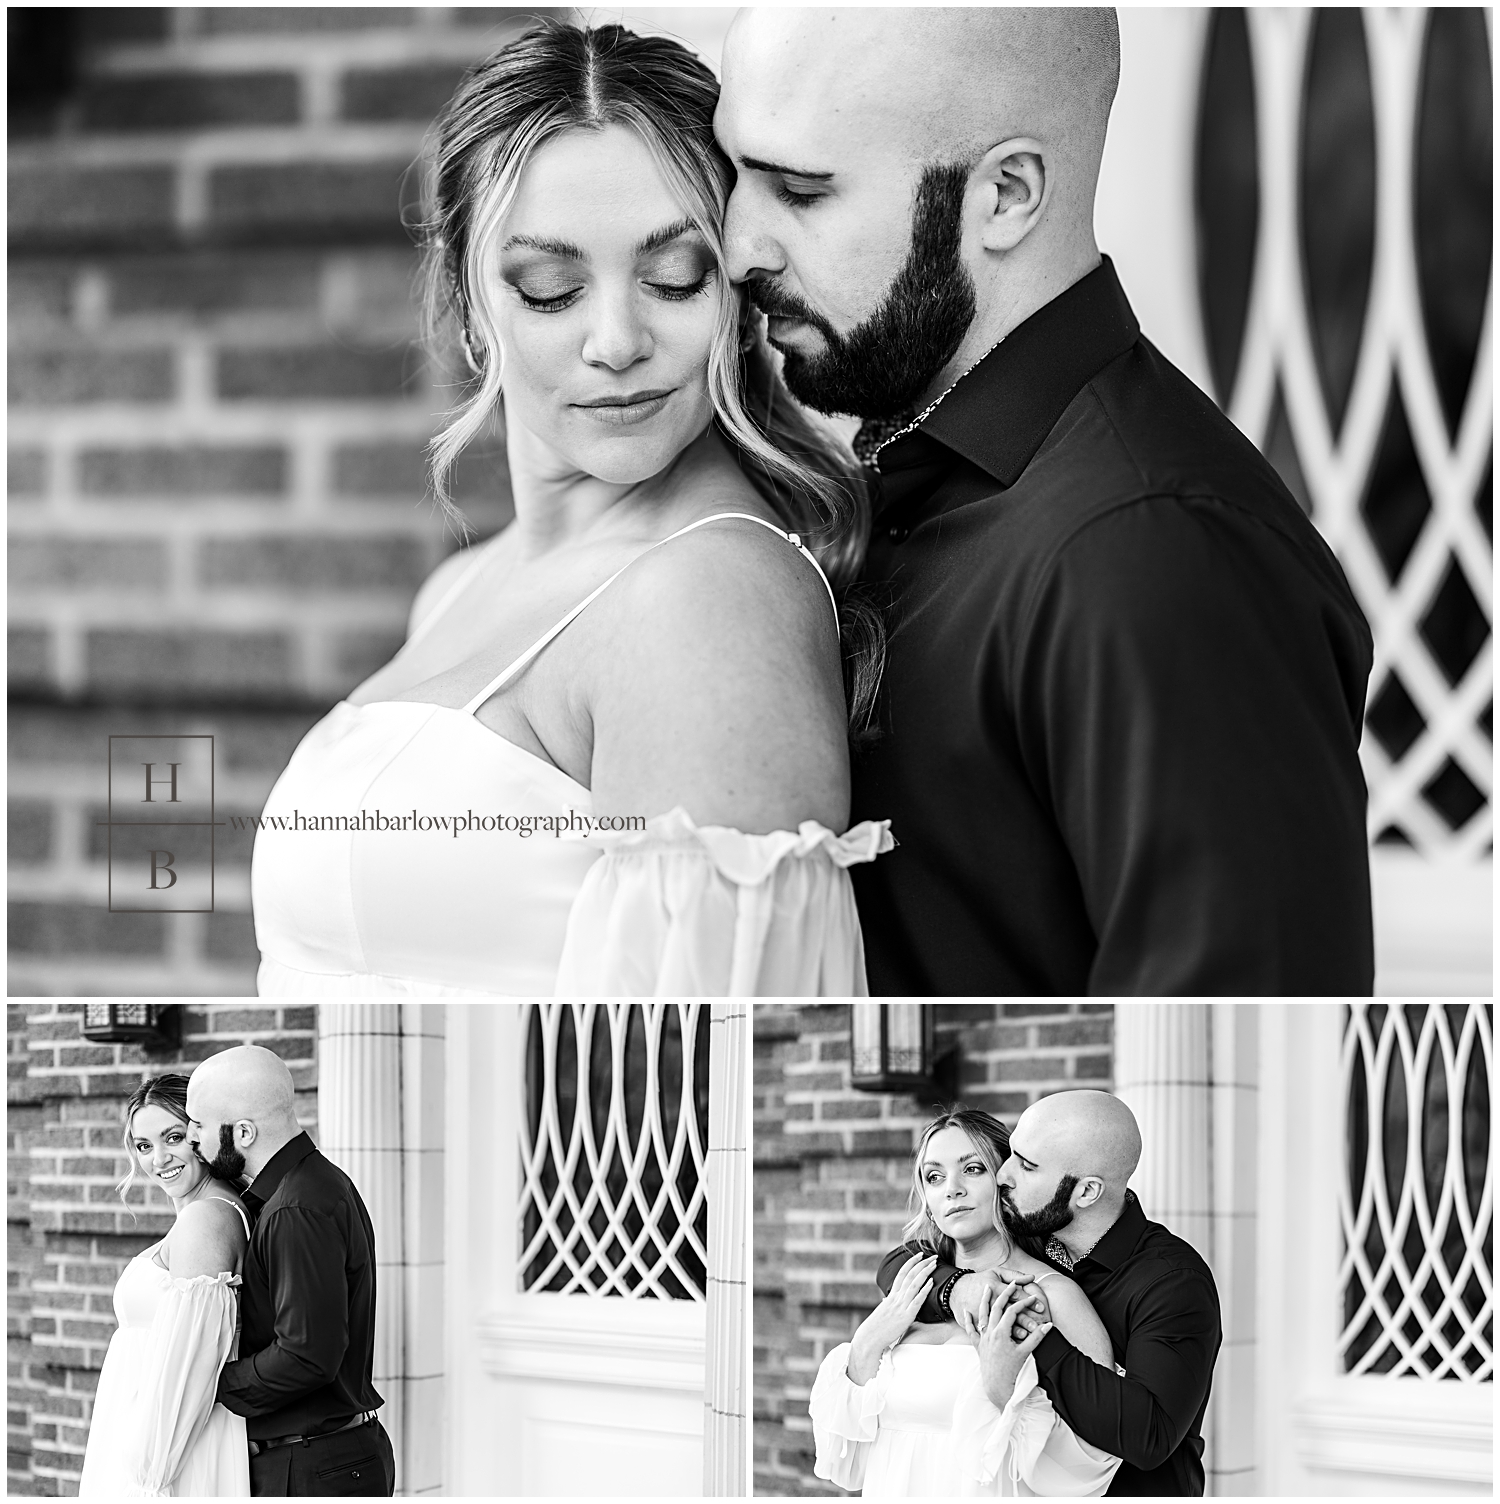 Black and white photos of man snuggling future wife wearing white dress.